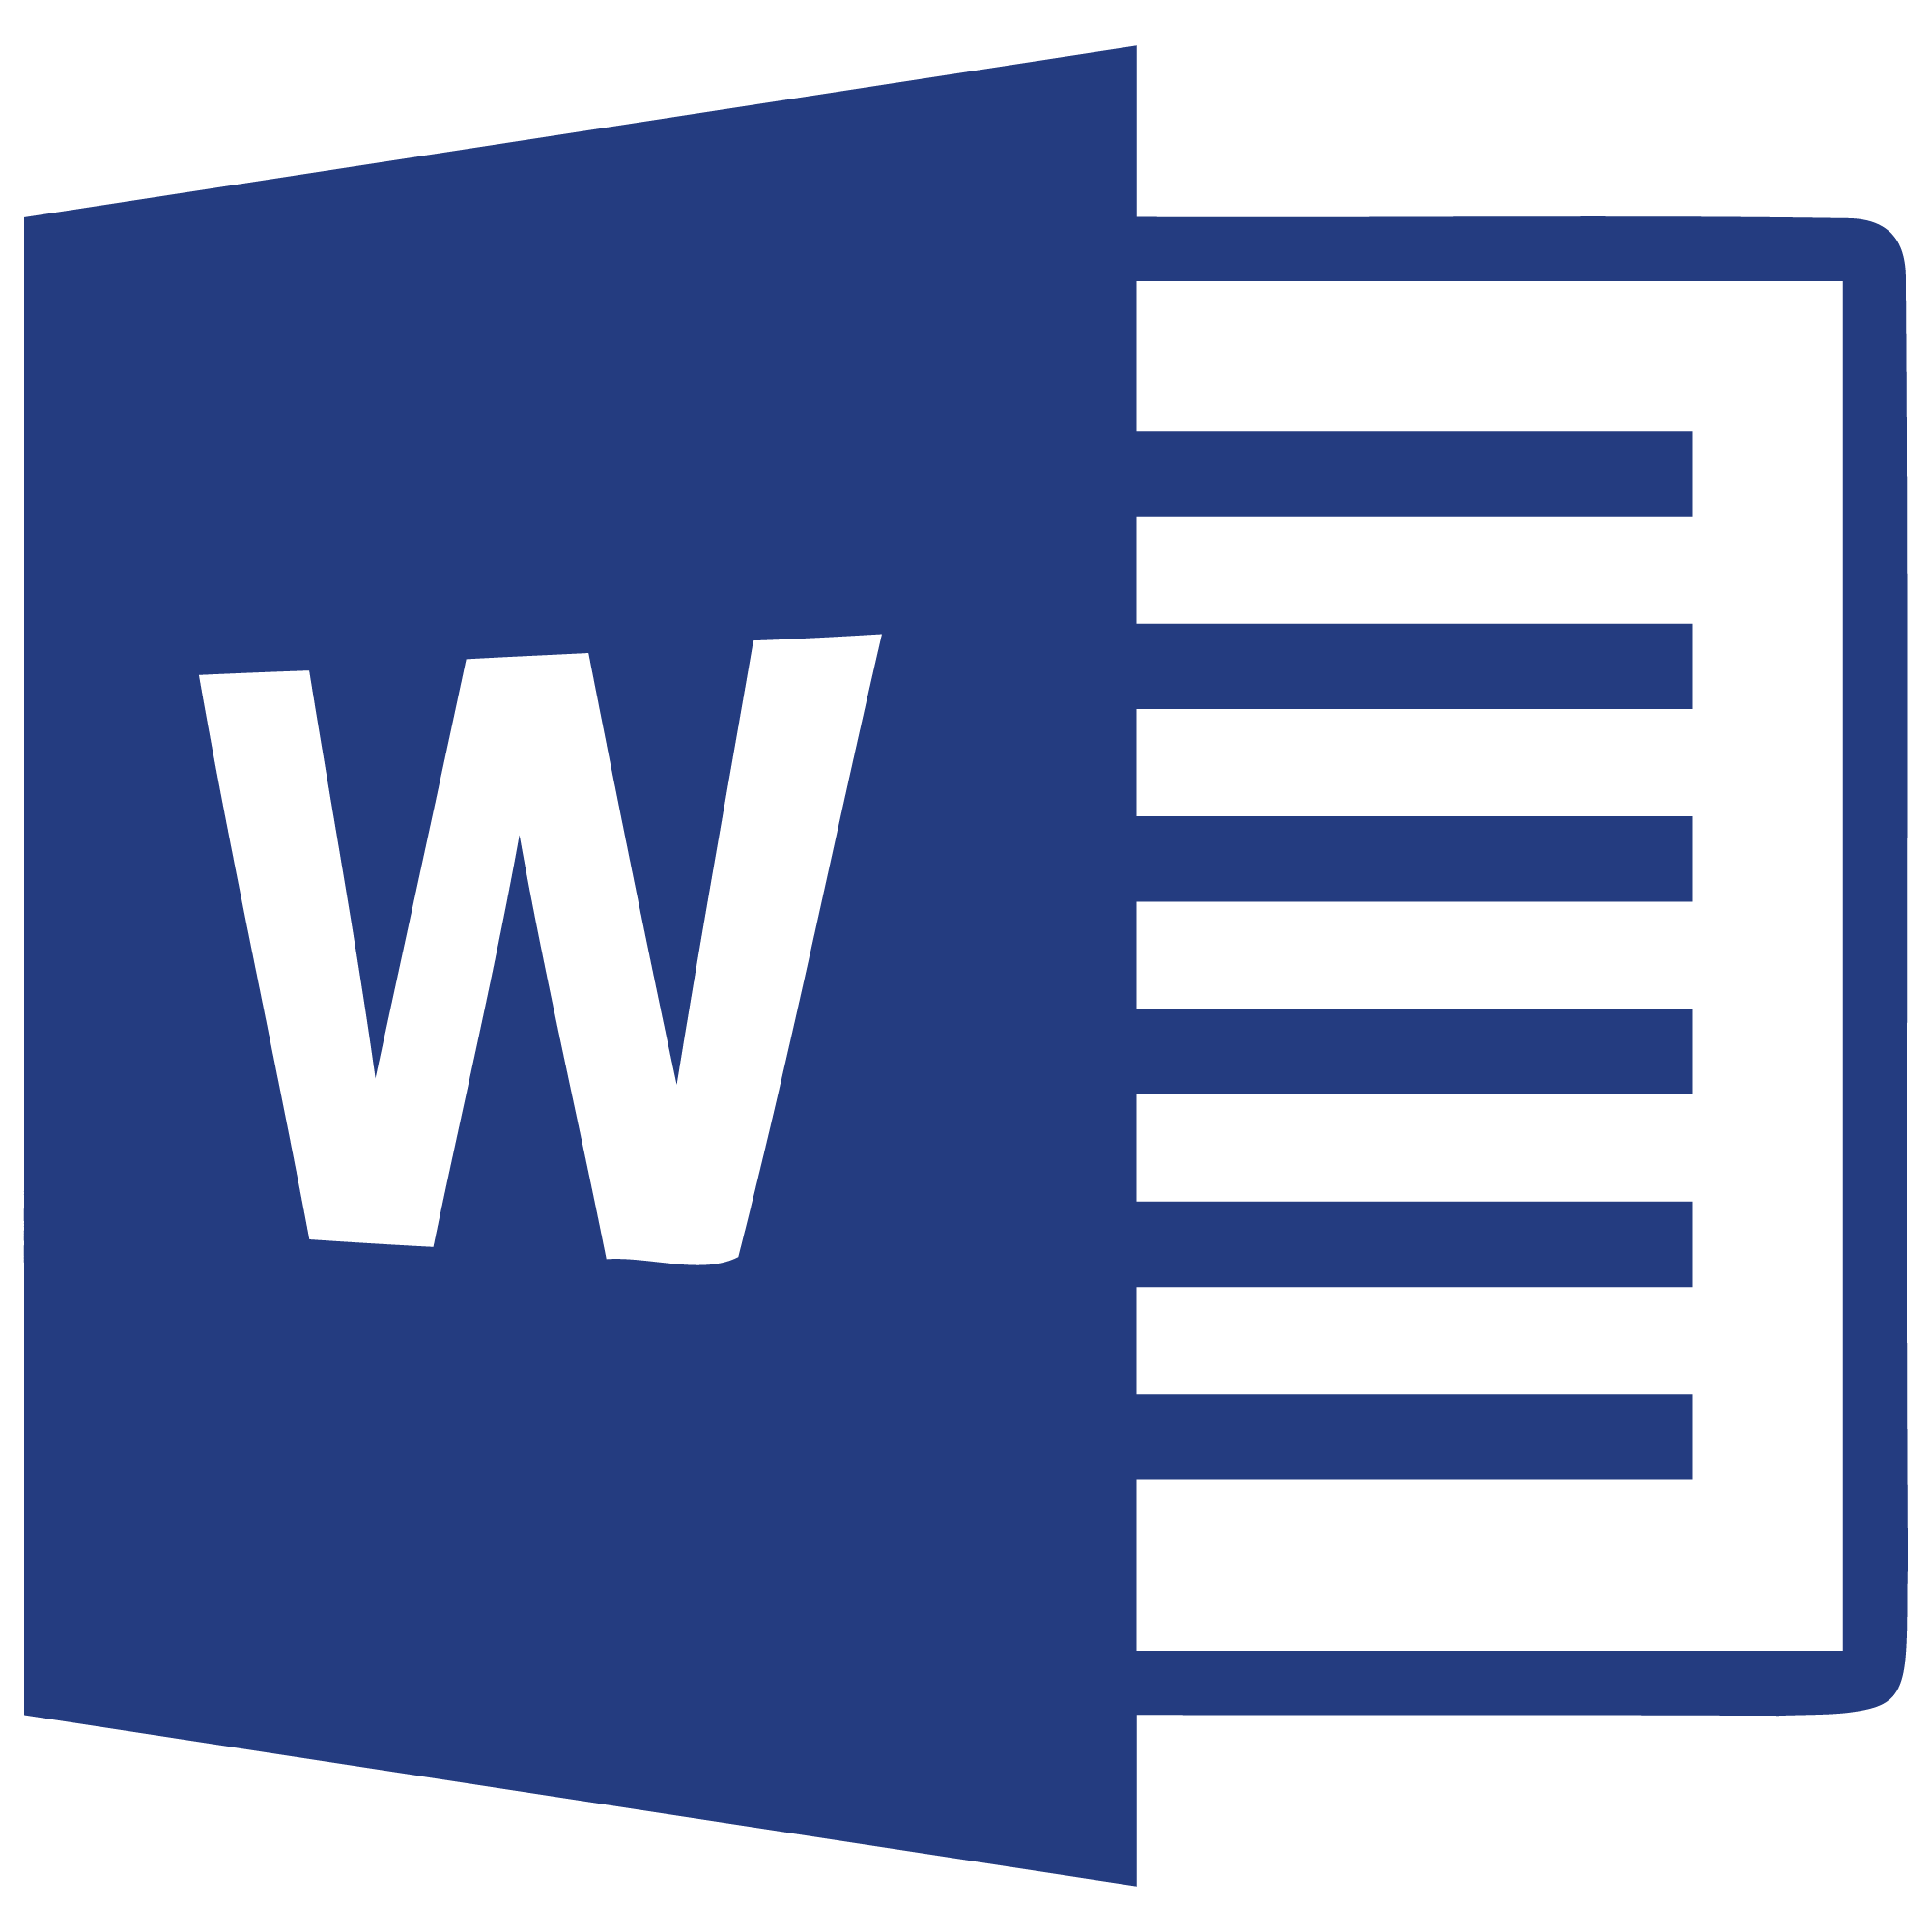 Annual Review and Planning Template  – Microsoft Word